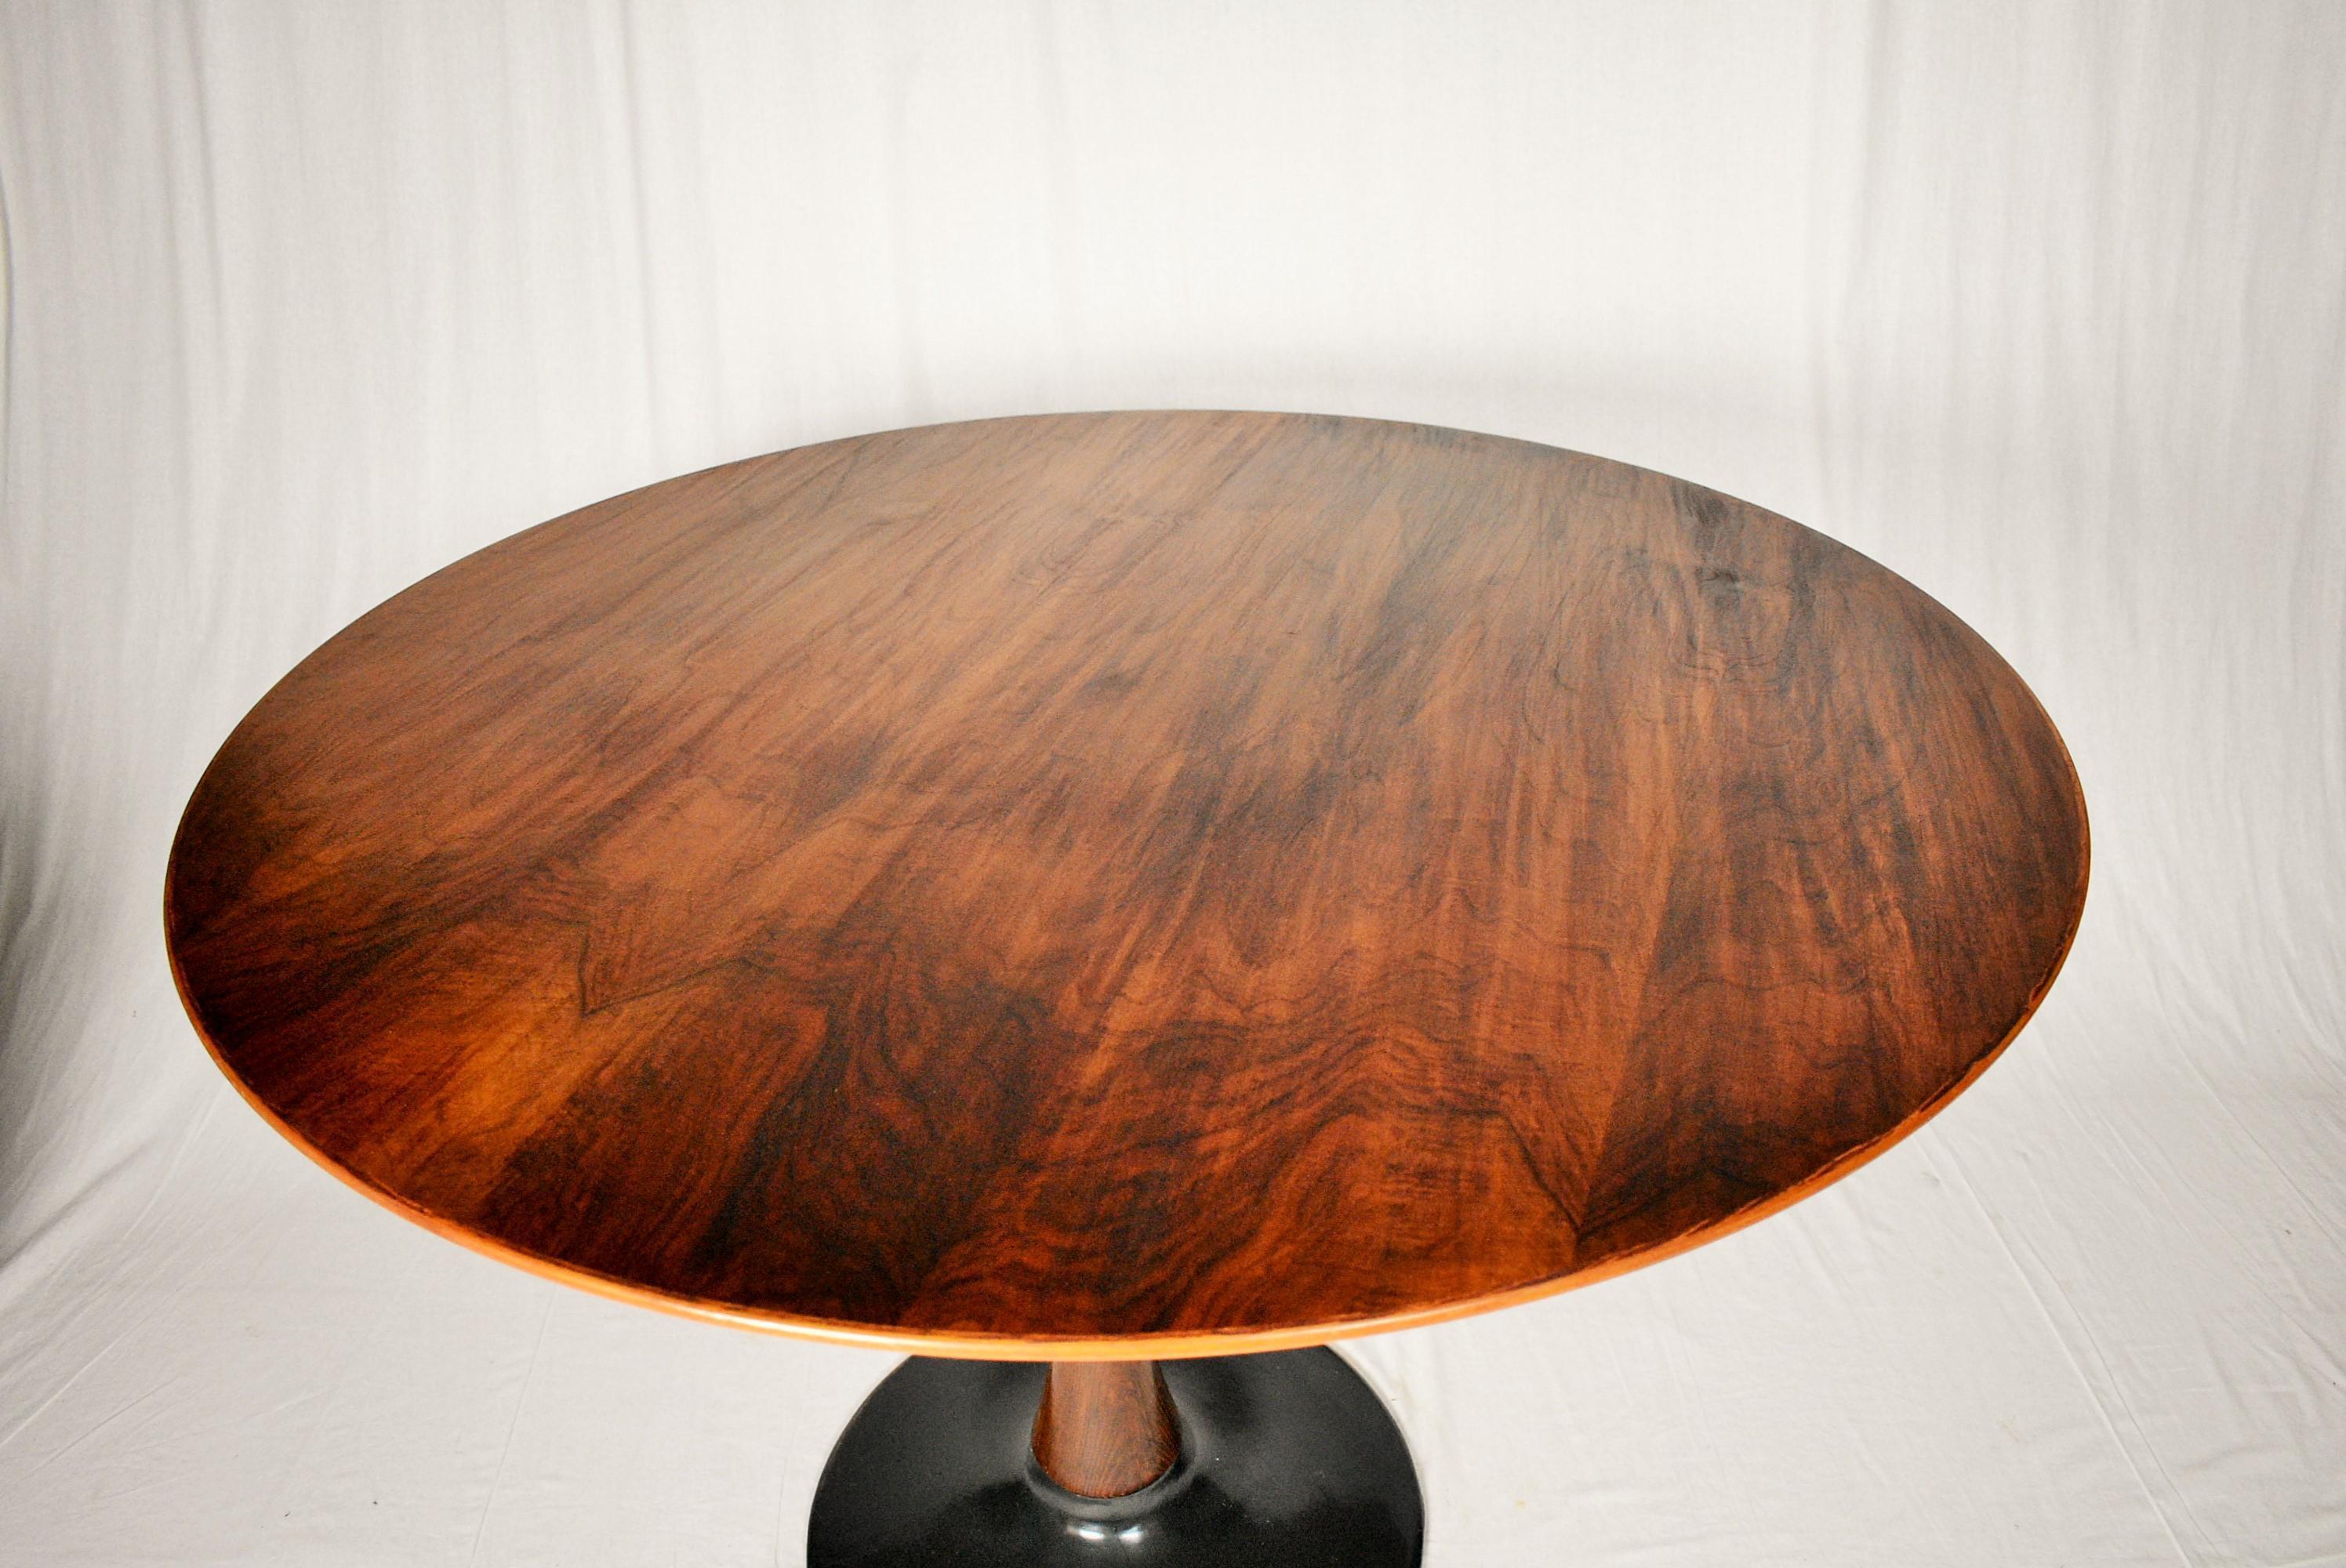 - Made in Czechoslovakia
- Made of beech, veneer
- The table is Stabil
- Good condition.
- Cleaned.